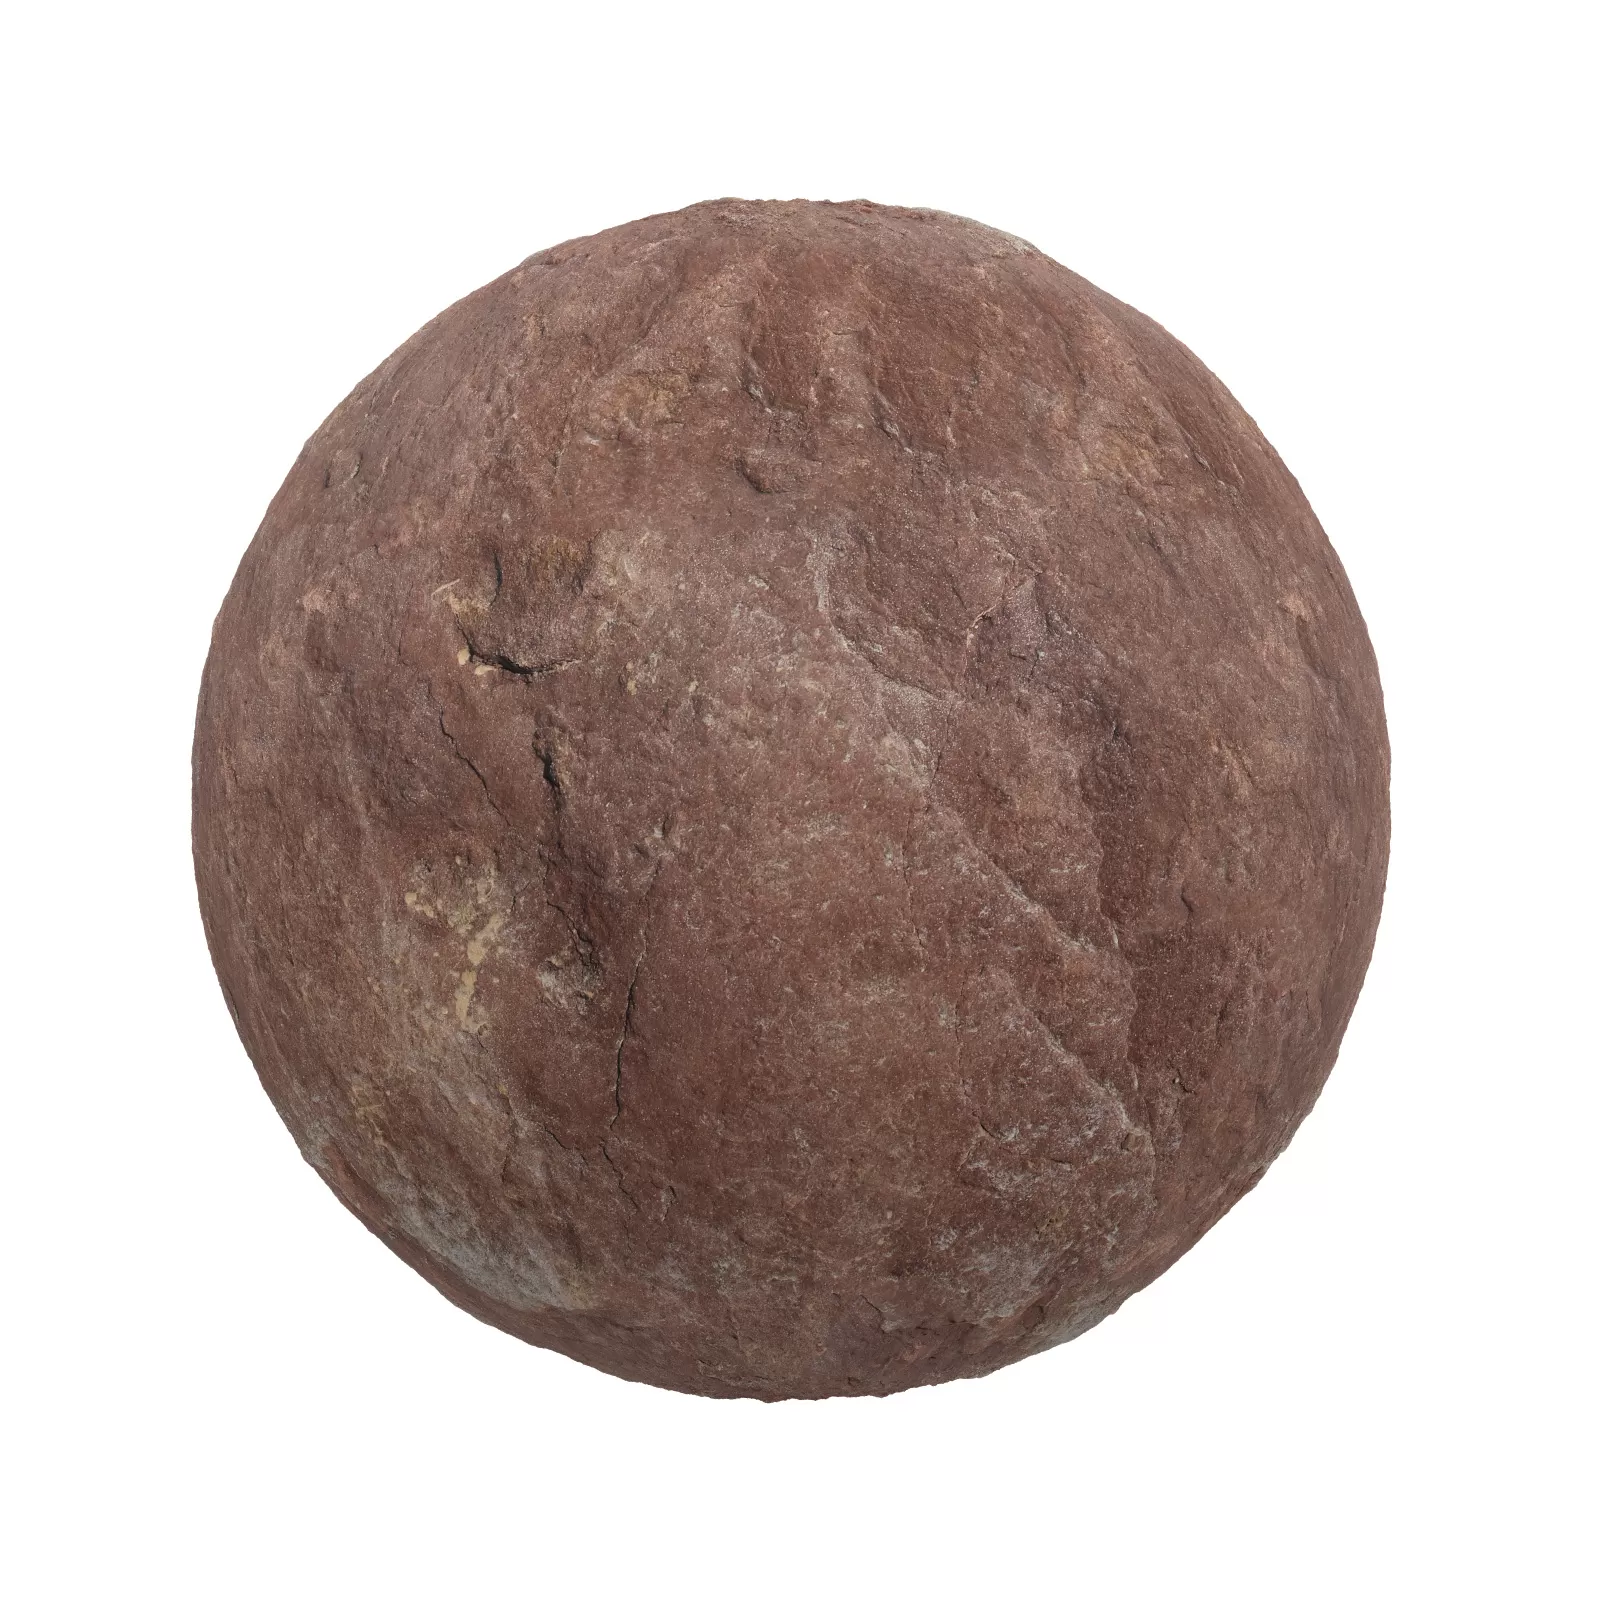 TEXTURES – STONES – CGAxis PBR Colection Vol 1 Stones – red sandstone